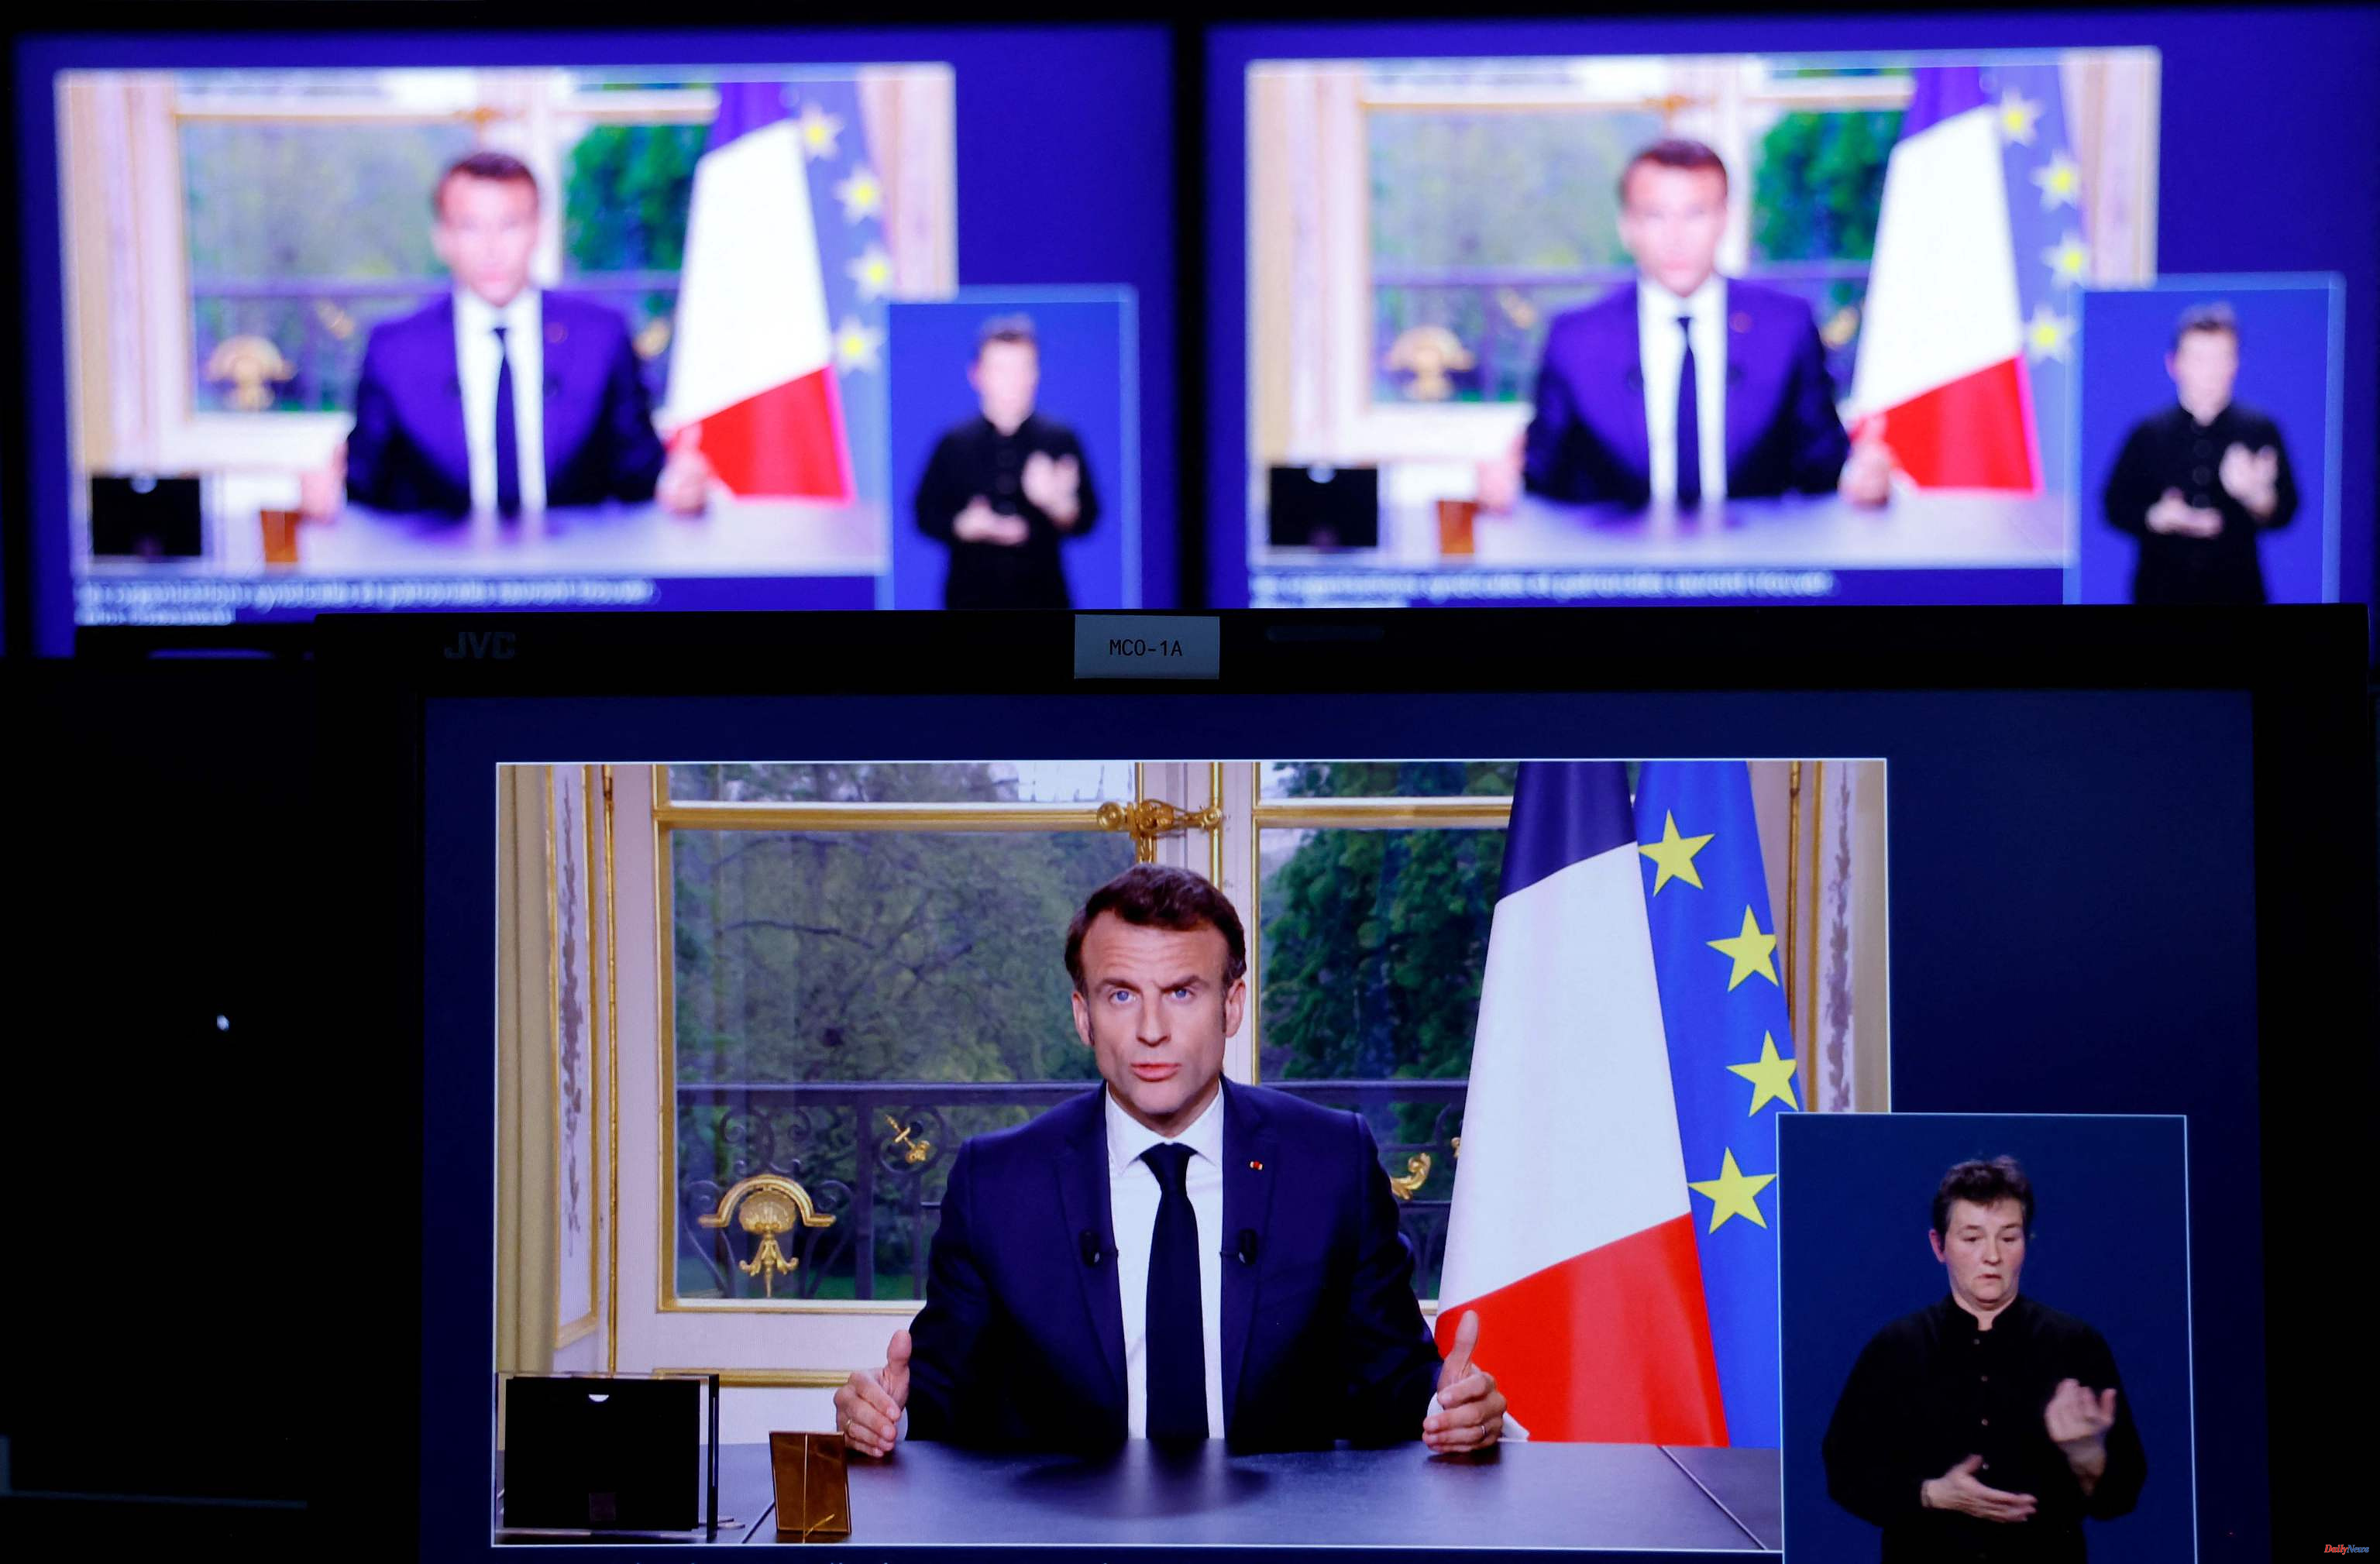 Pensions Macron admits "the anger" of the French, but considers the crisis settled